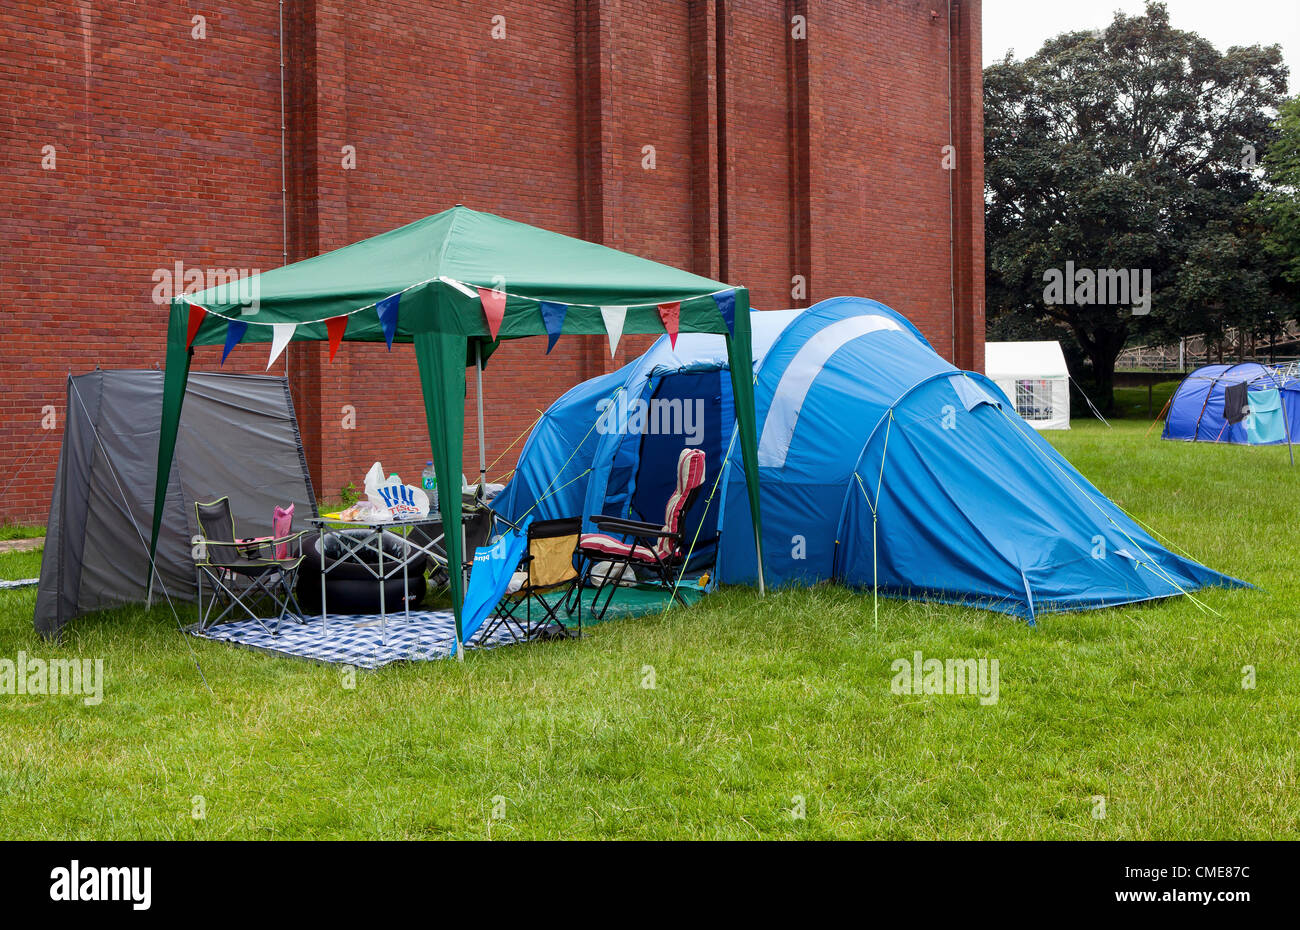 Richmond Upon Thames College, Twickenham, Greater London, UK - A tent village  appeared on a field at the college last week. The company, London Tents,  offers affordable camping accommodation with good facilities - the organisers are Dave Evans and Glynn Eastwood. Olympic games volunteers from all over the world  are staying here. Stock Photo